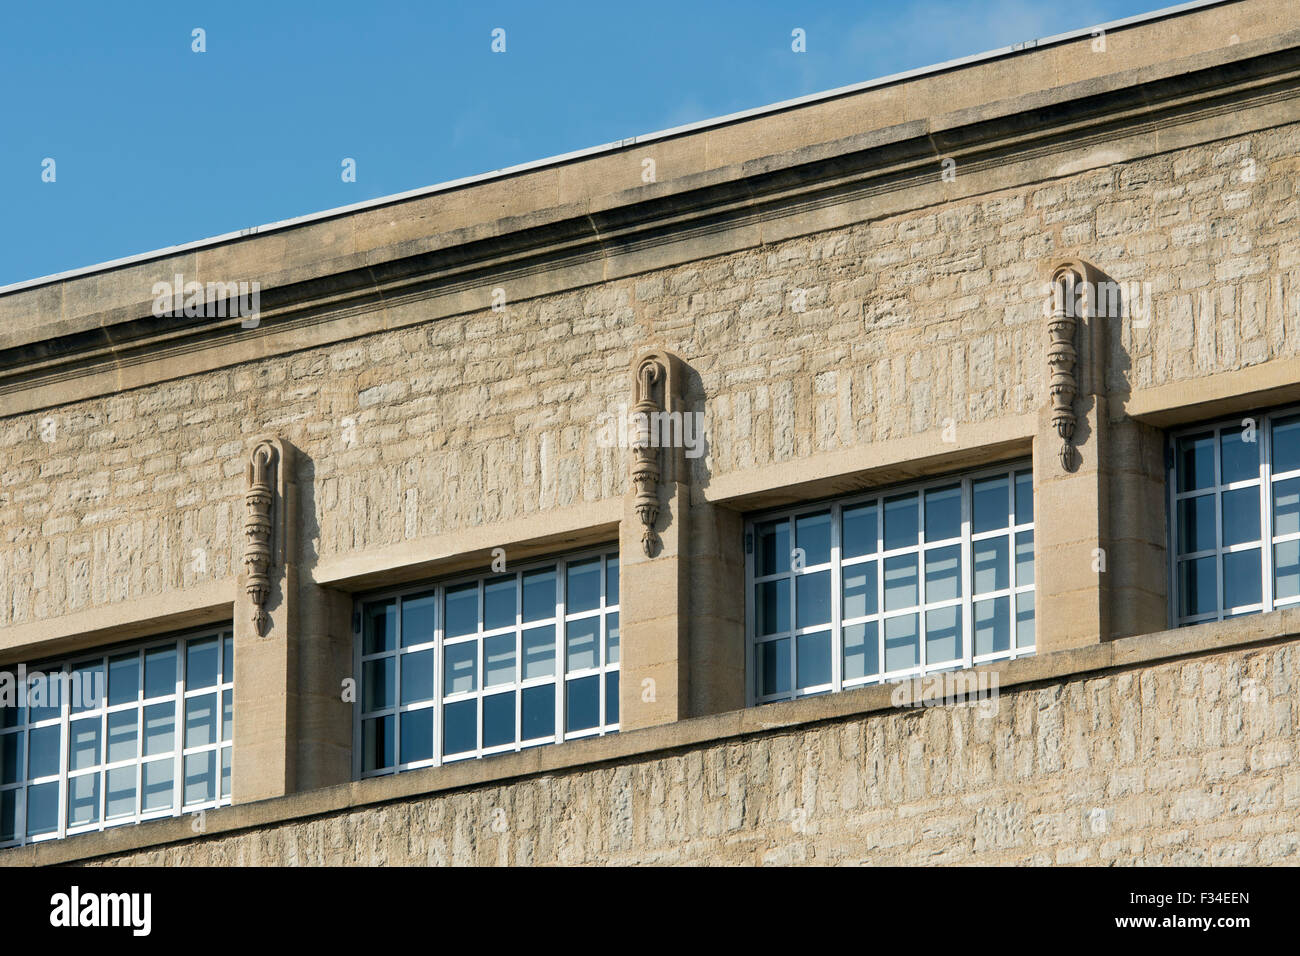 The Weston Library building detail, Oxford, England, UK Stock Photo